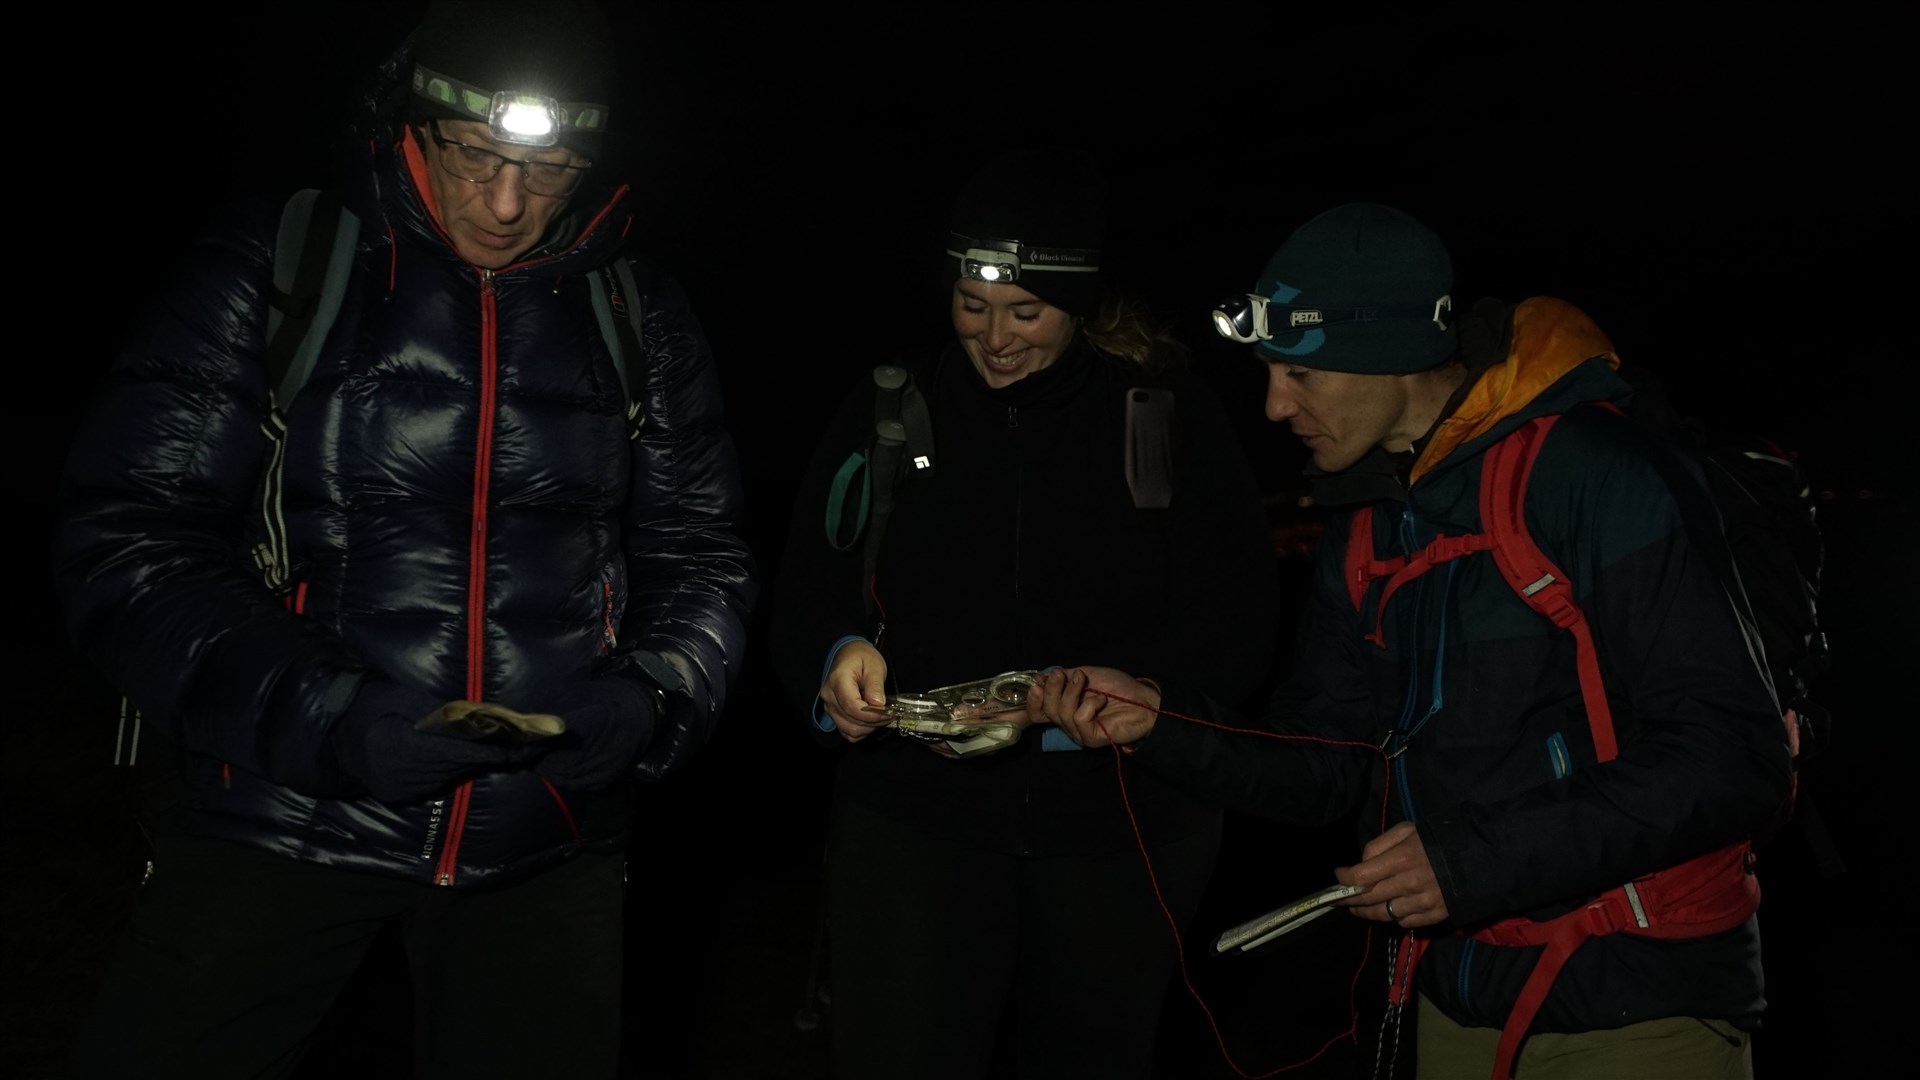 Head torches are an essential item for kit bags with the arrival of the early dark nights.